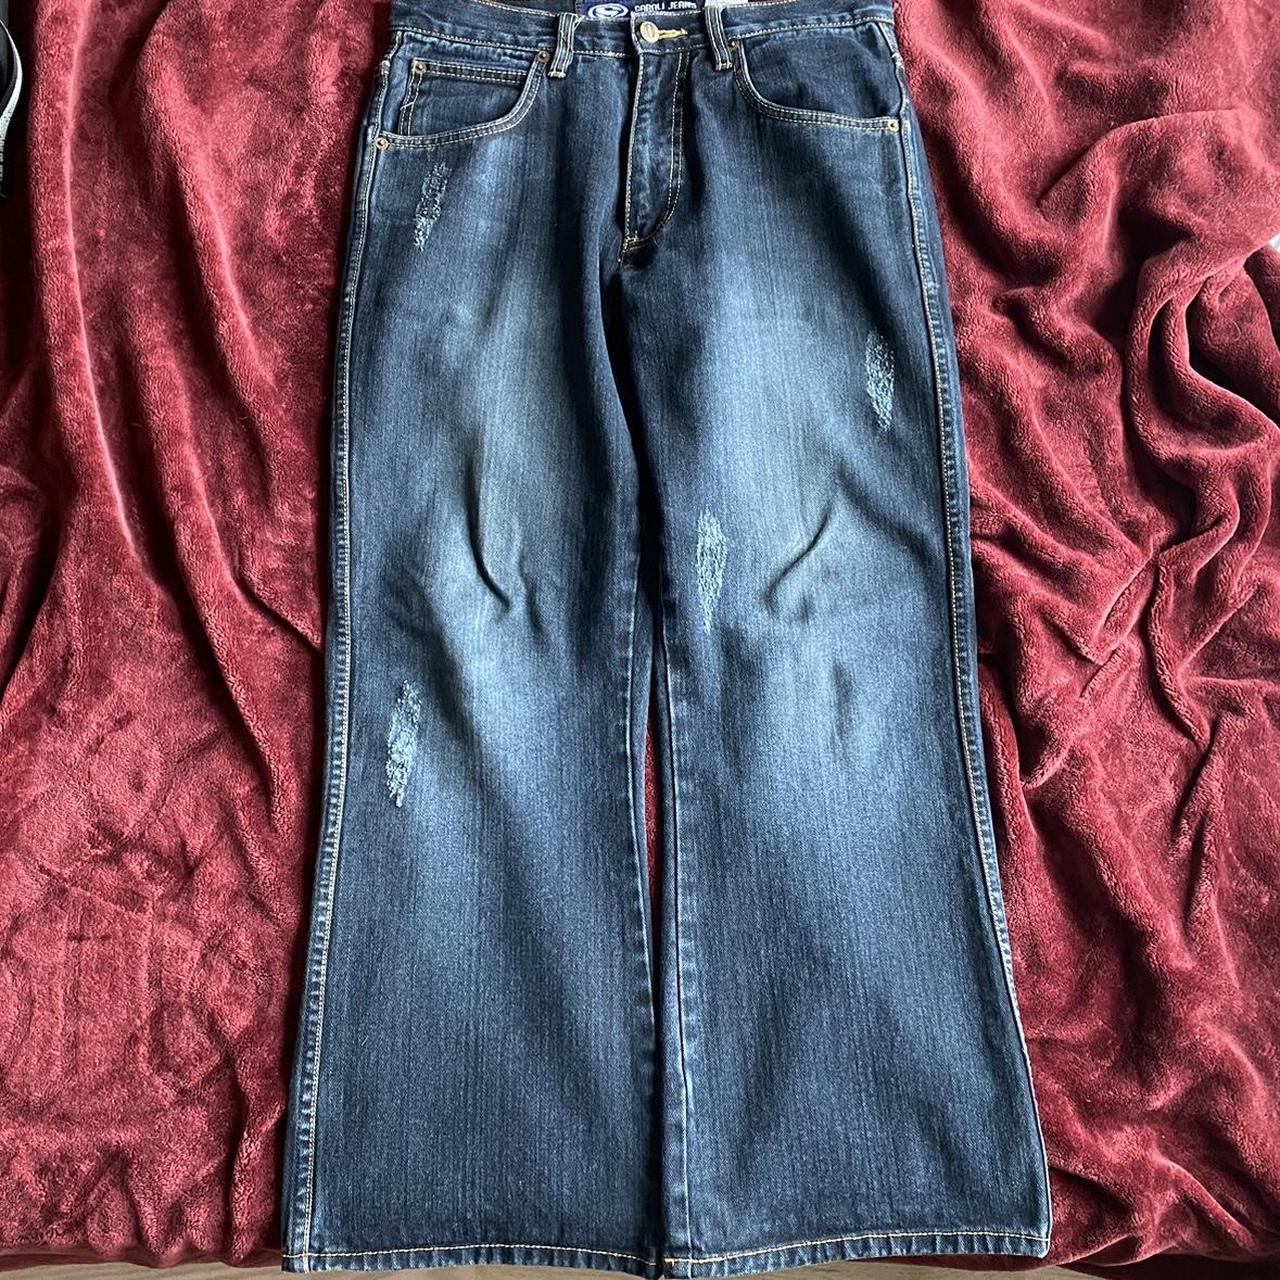 Sarali Bootcut Jeans no flaws but the distressing... - Depop